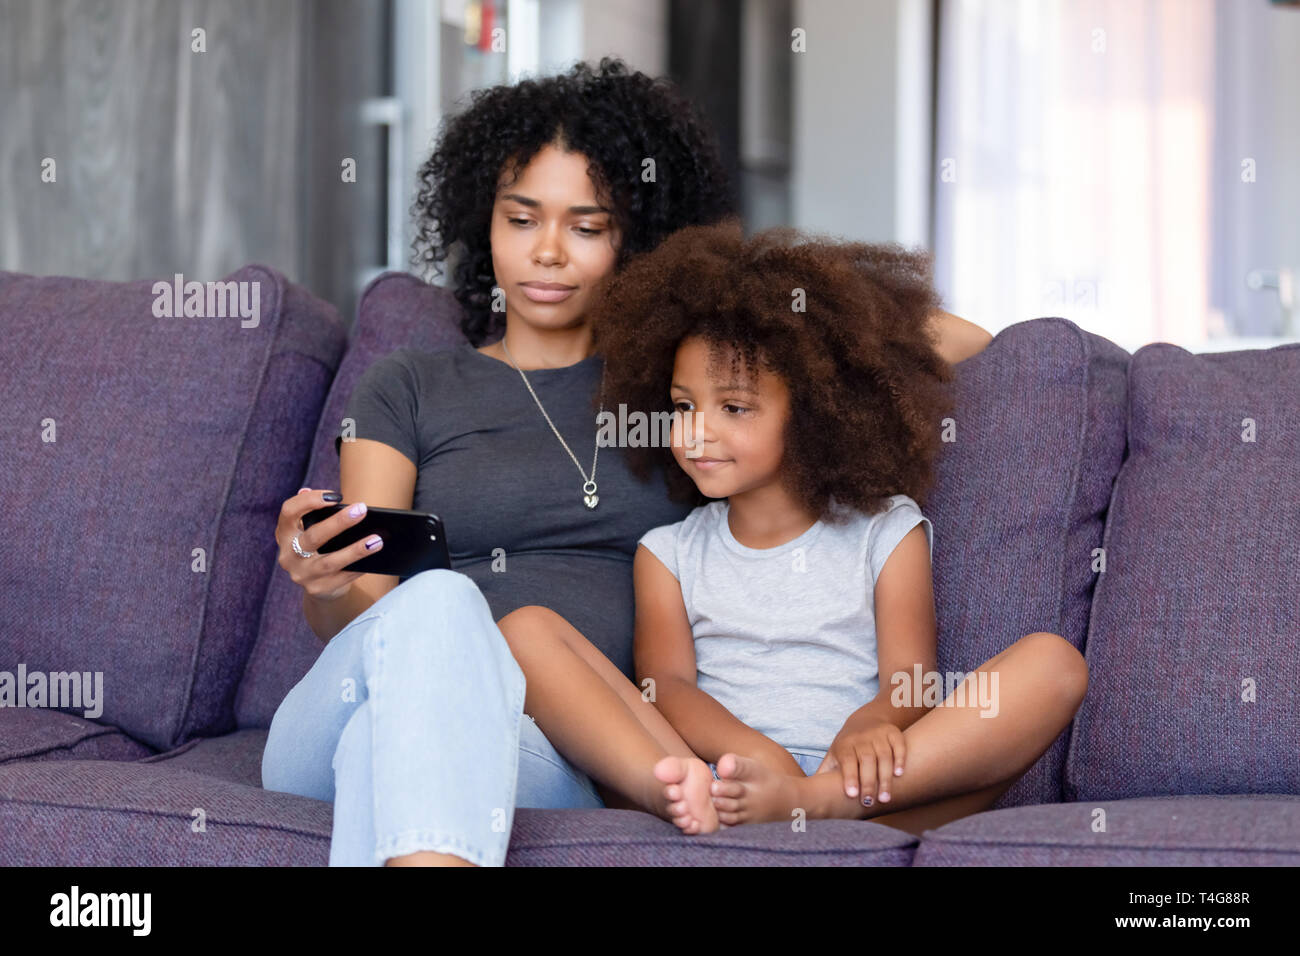 African American woman with daughter using phone together at home Stock Photo